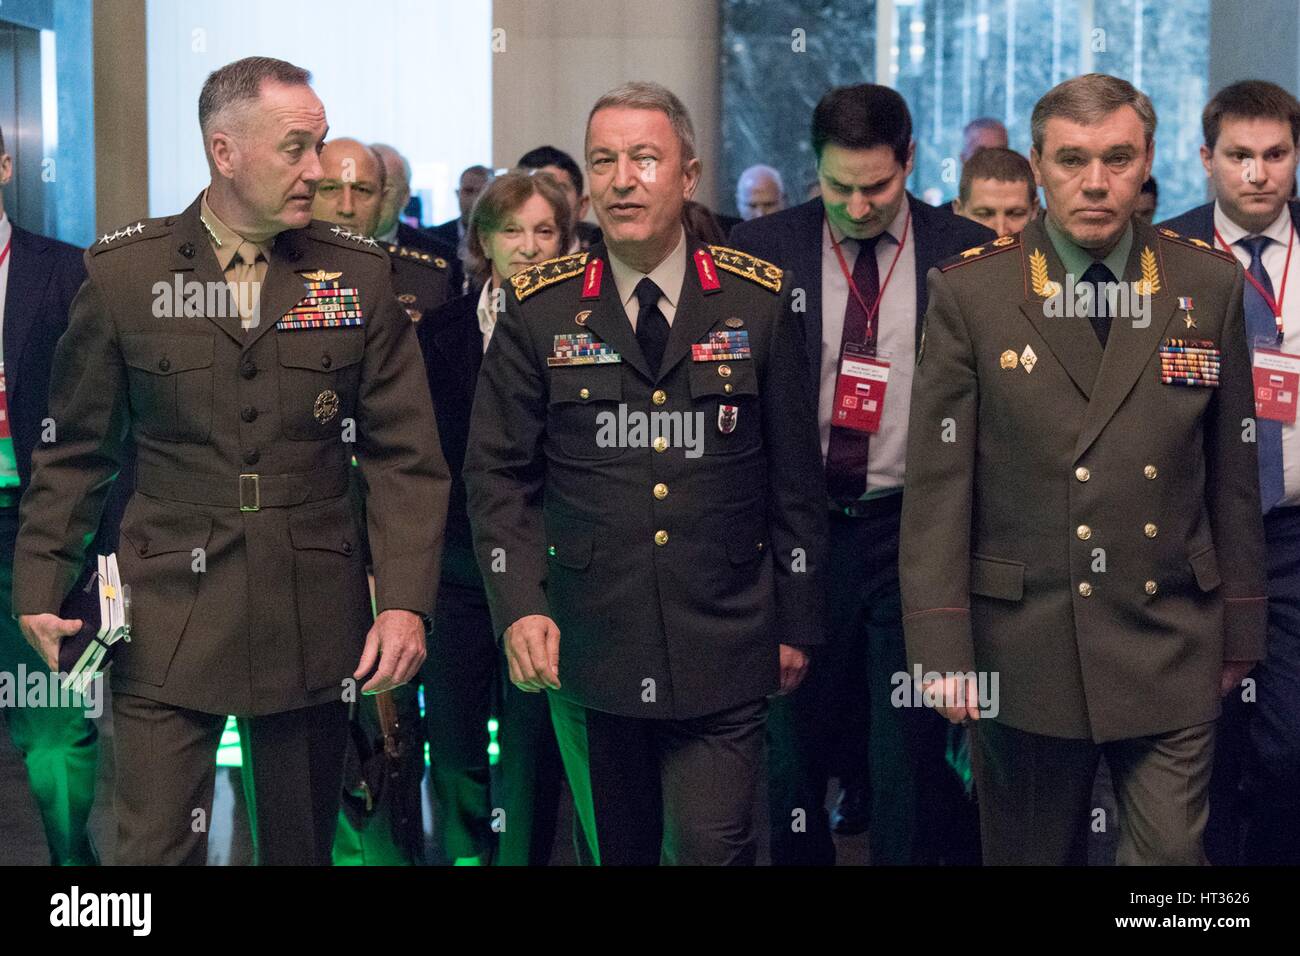 Antalya, Turkey. 7th Mar, 2017. U.S. Joint Chiefs Chairman Gen. Joseph Dunford, left, walks along with Turkish Gen. Hulusi Akar and Russian Gen. Valery Gerasimov, right, during meetings March 7, 2017 in Antalya, Turkey. The three chiefs of defense are meeting to discuss operations in Syria. Credit: Planetpix/Alamy Live News Stock Photo